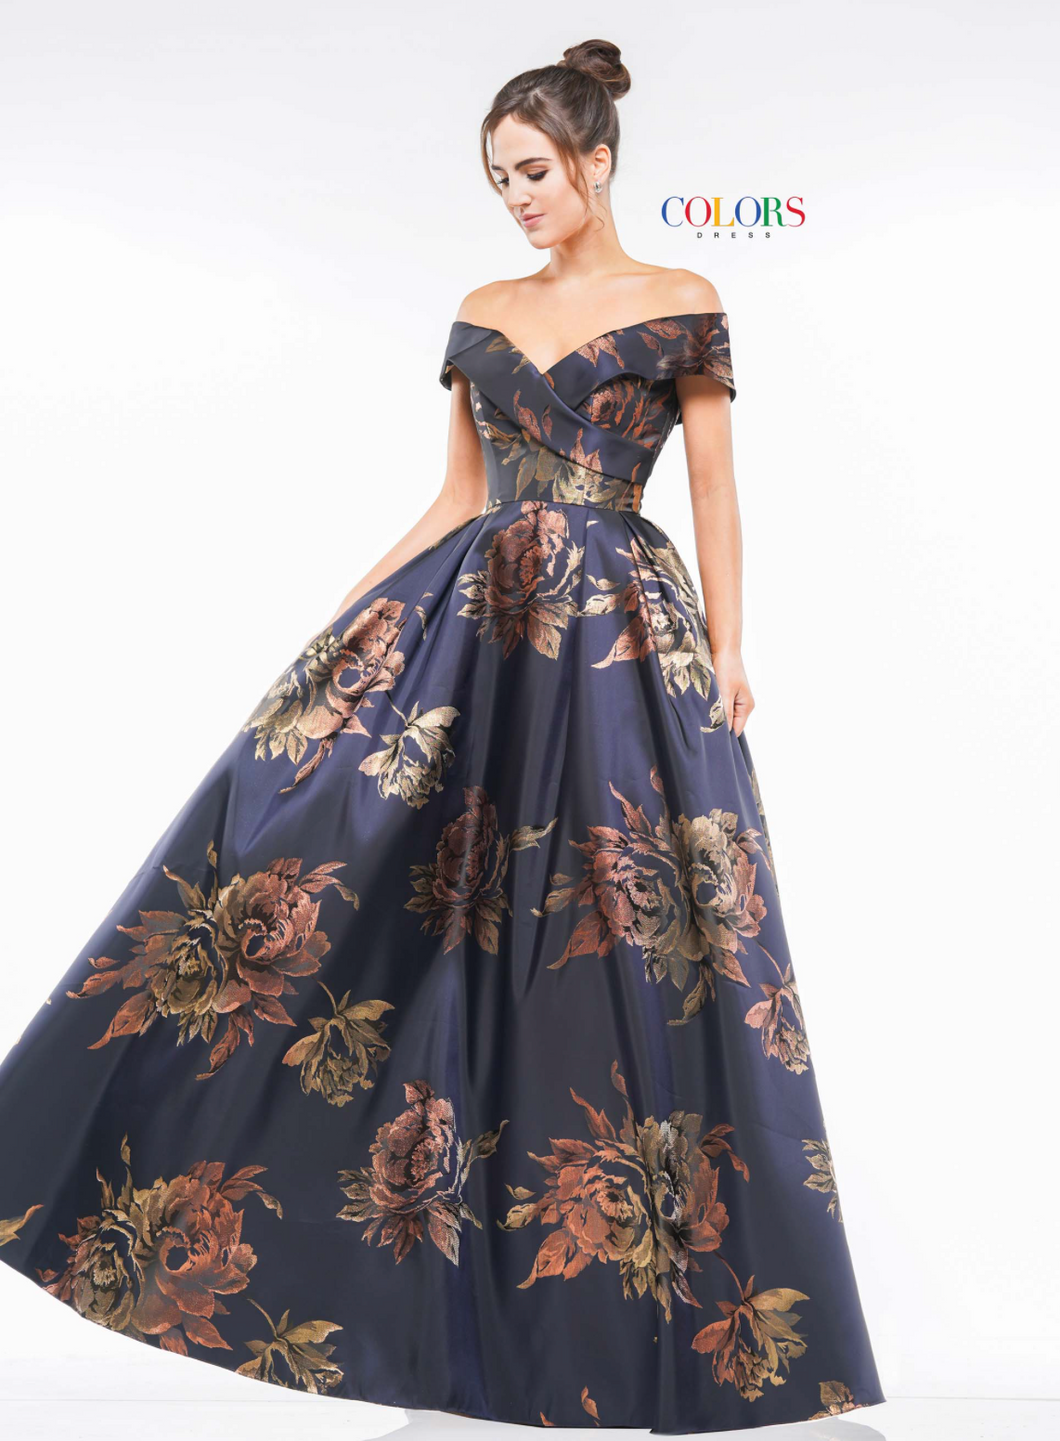 Colors Spring 2019 style 2144